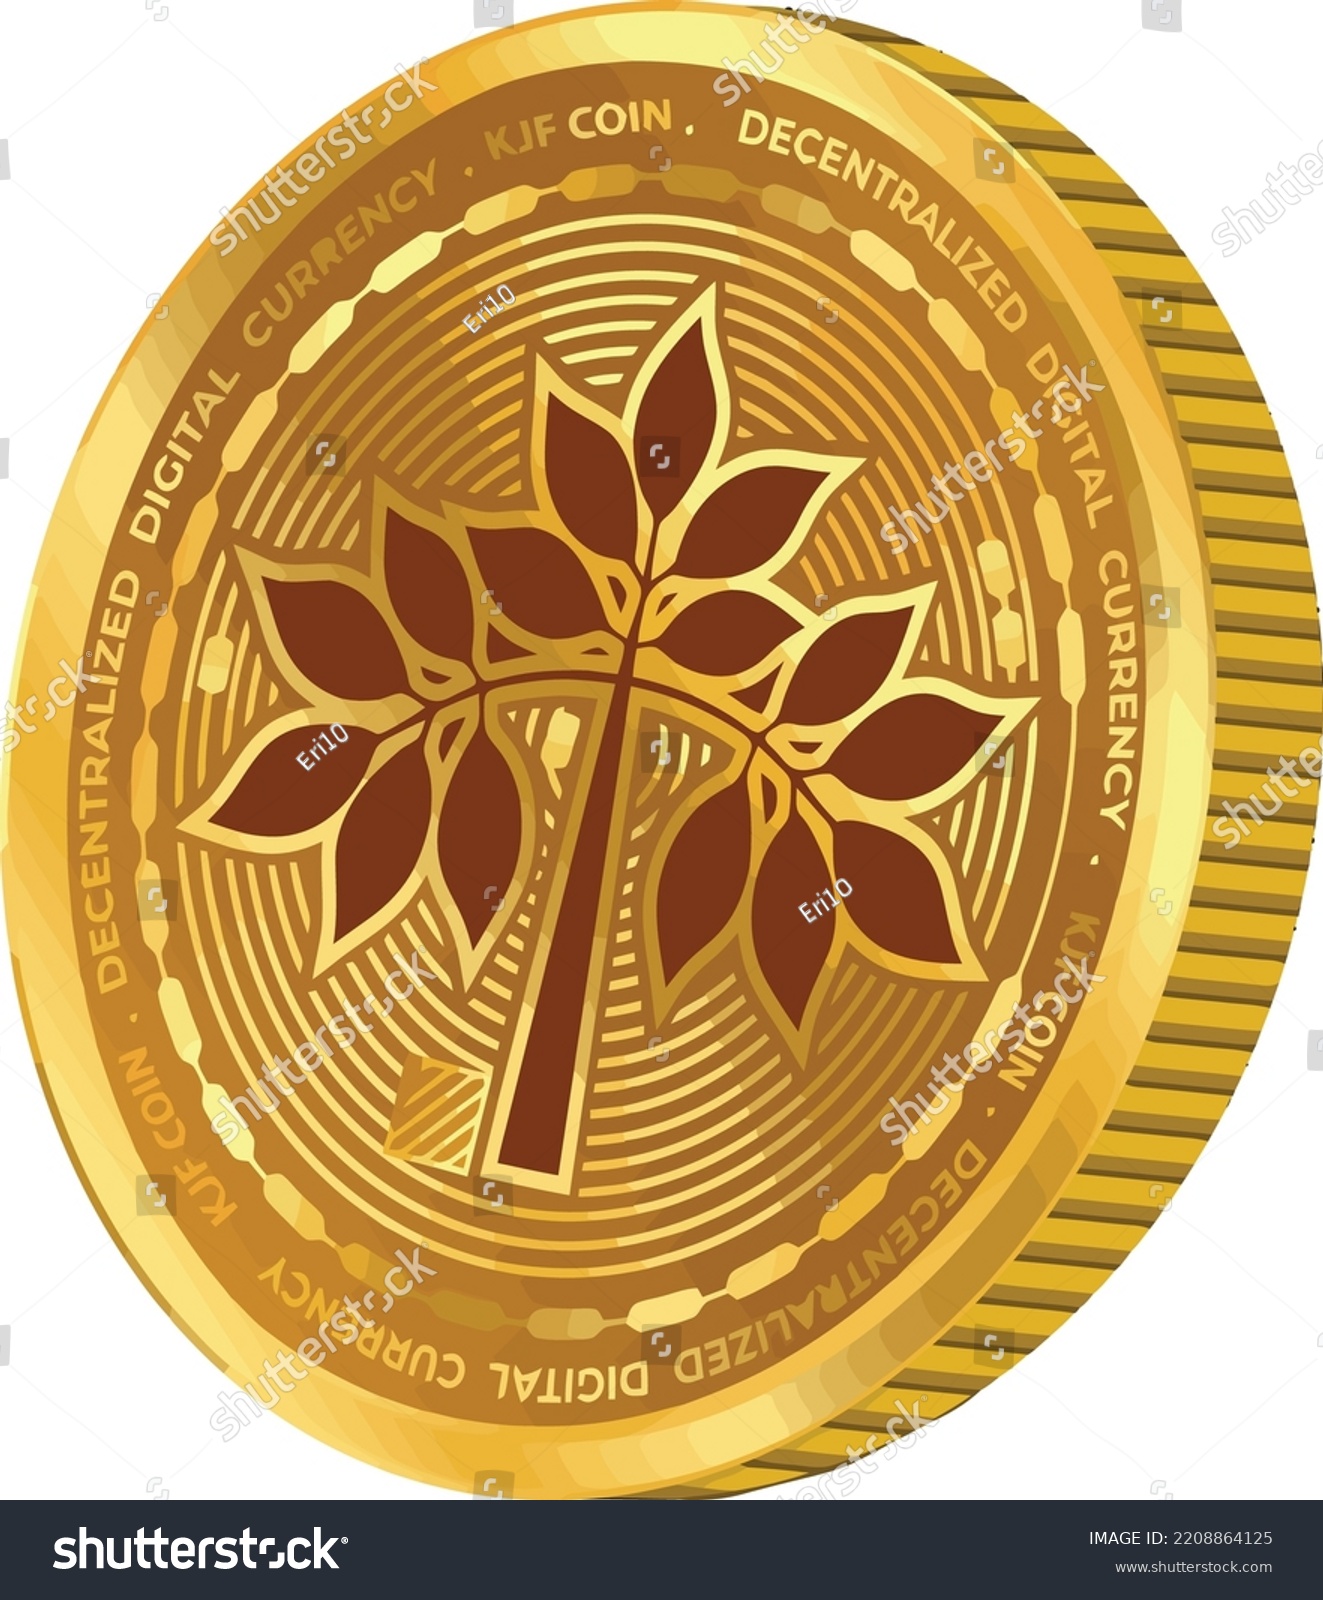 SVG of token konjac cryptocurrency with binance smart chain svg